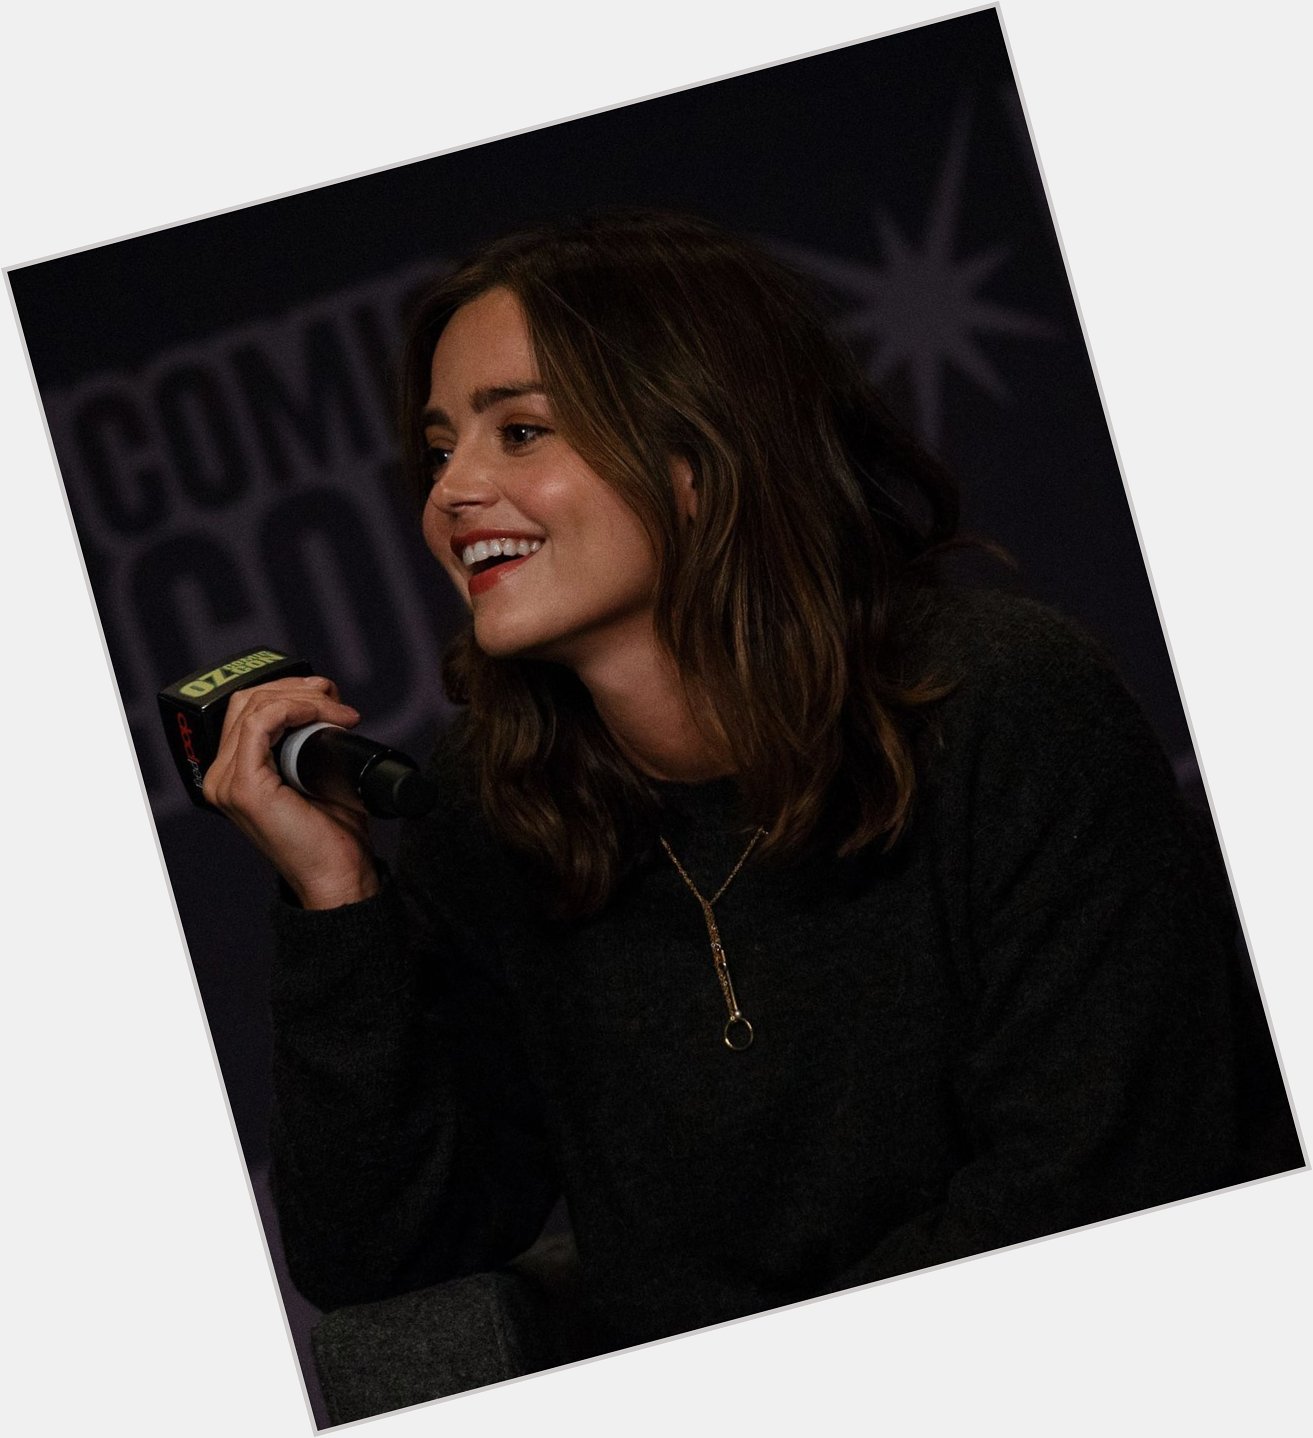 Happy birthday jenna coleman  love you with all my heart  